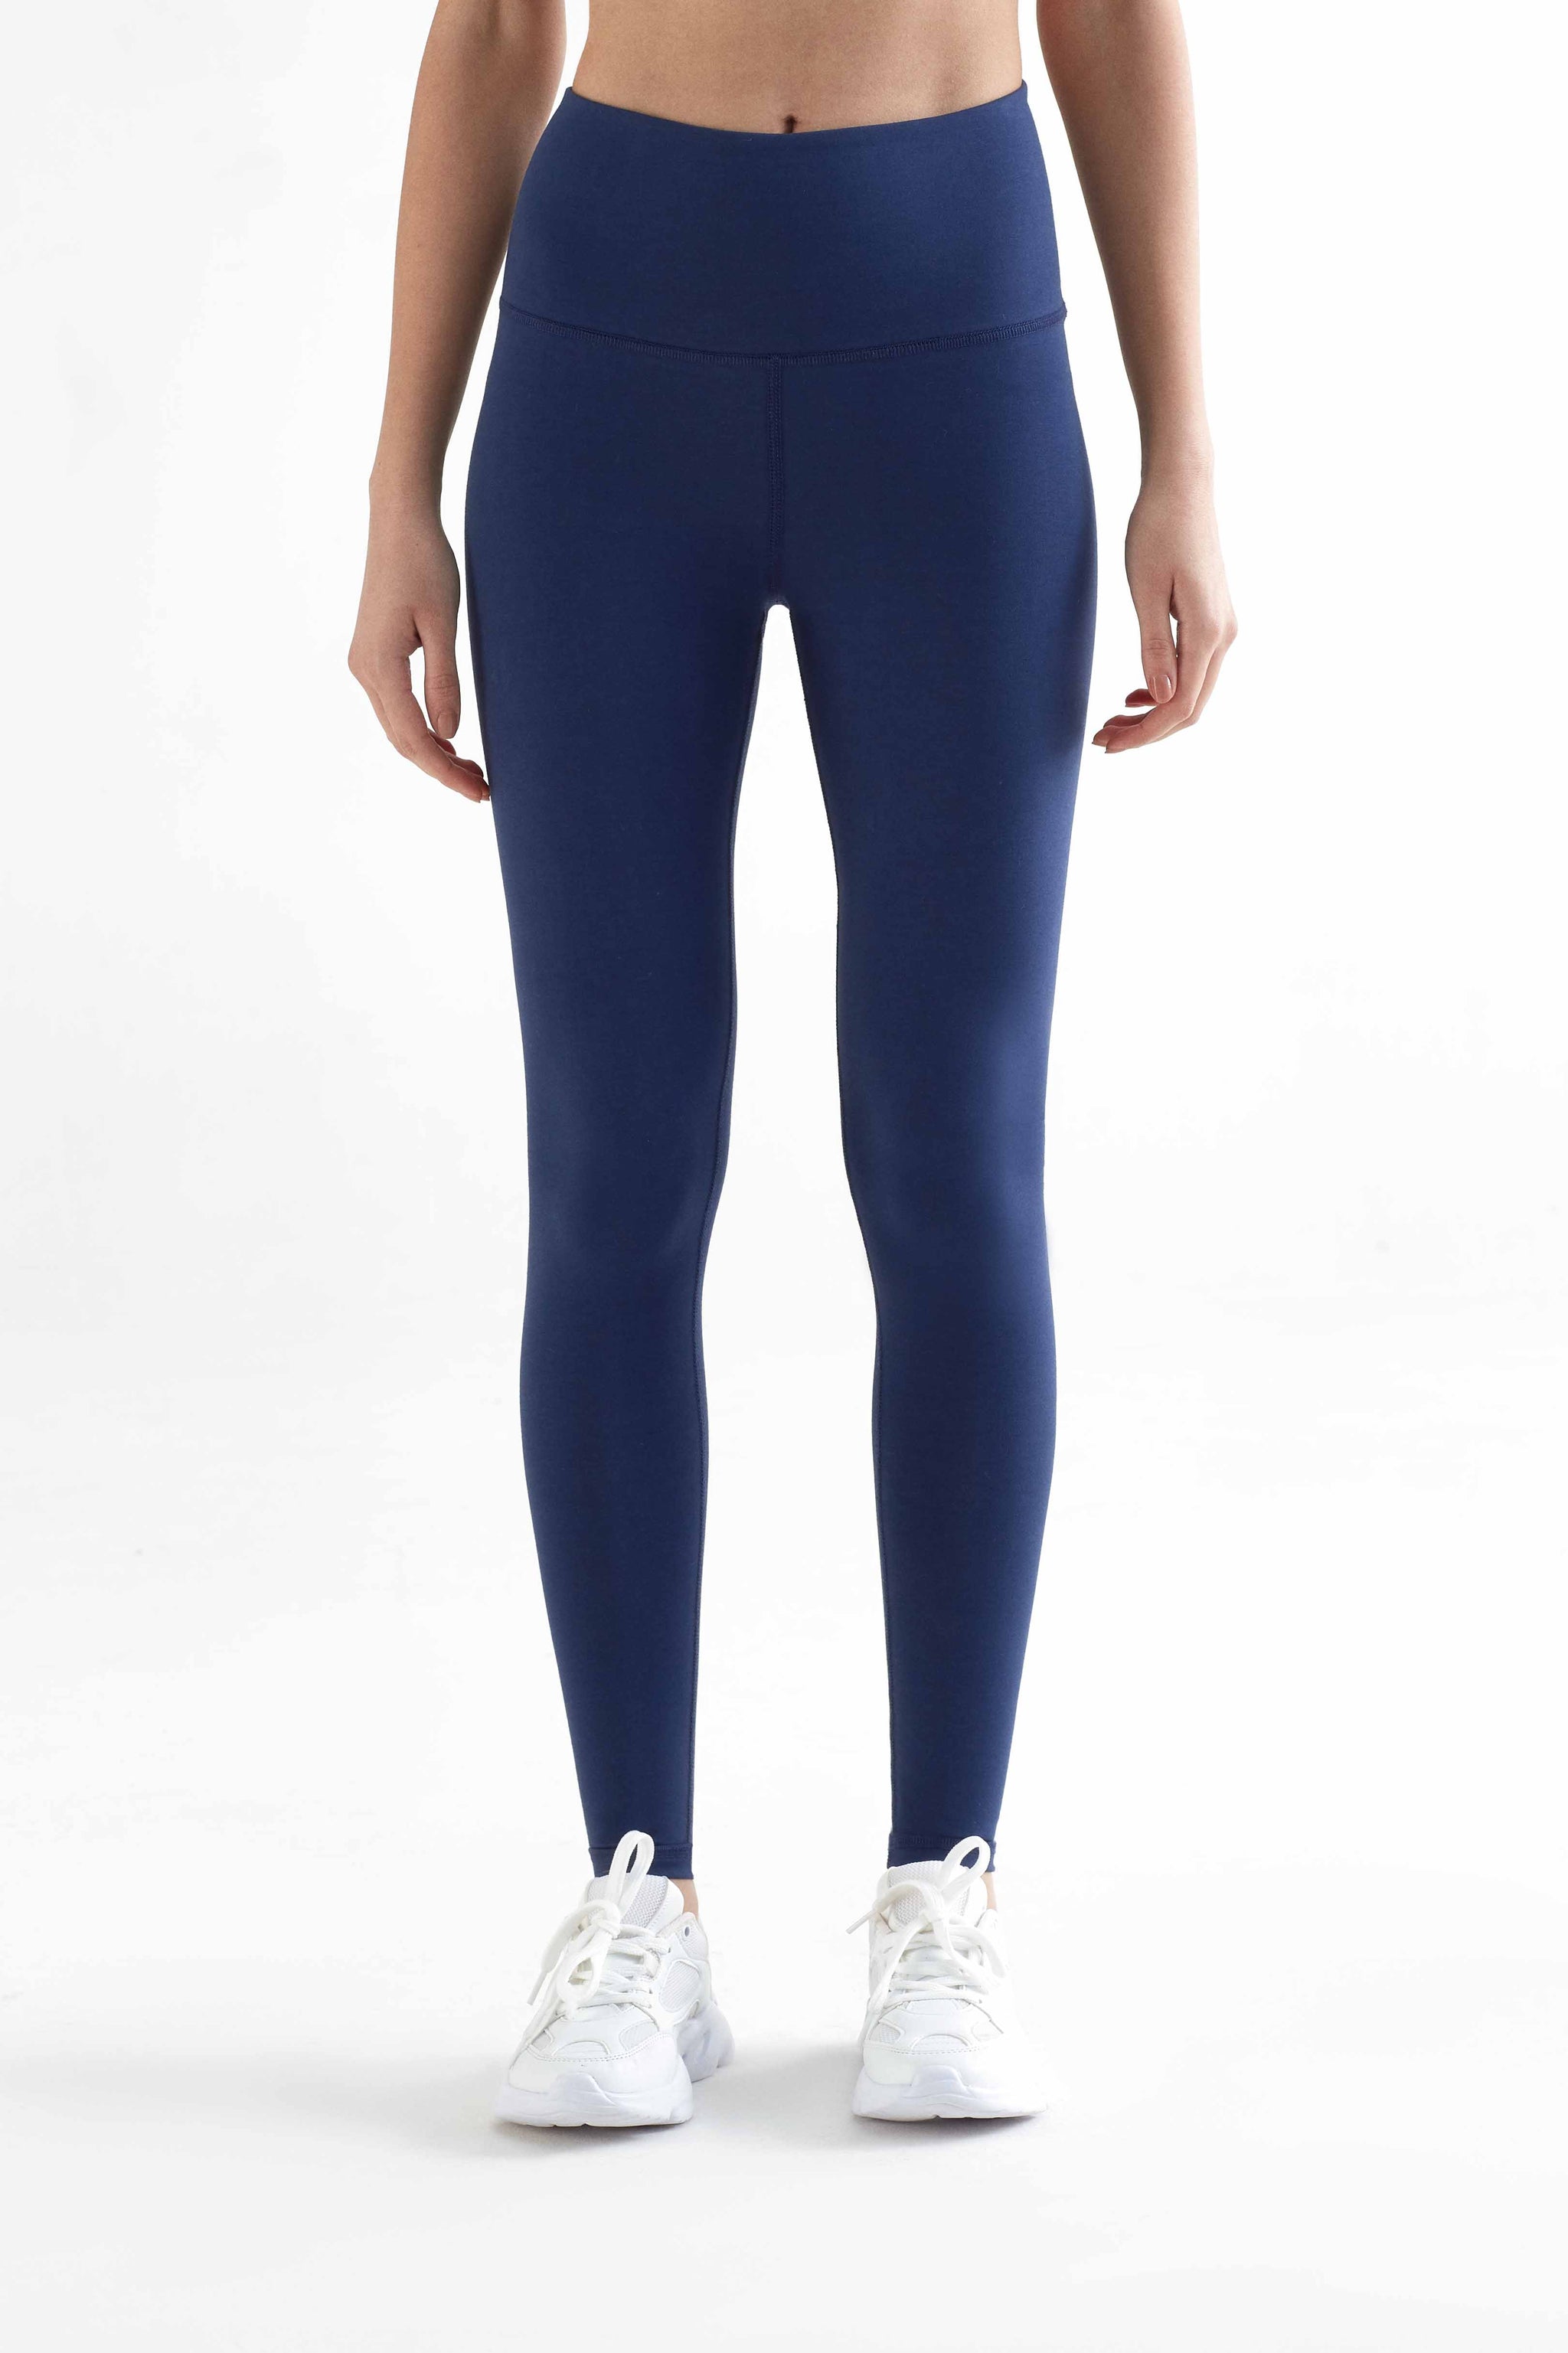 The North Face Solid Navy Blue Leggings Size 3X (Plus) - 60% off